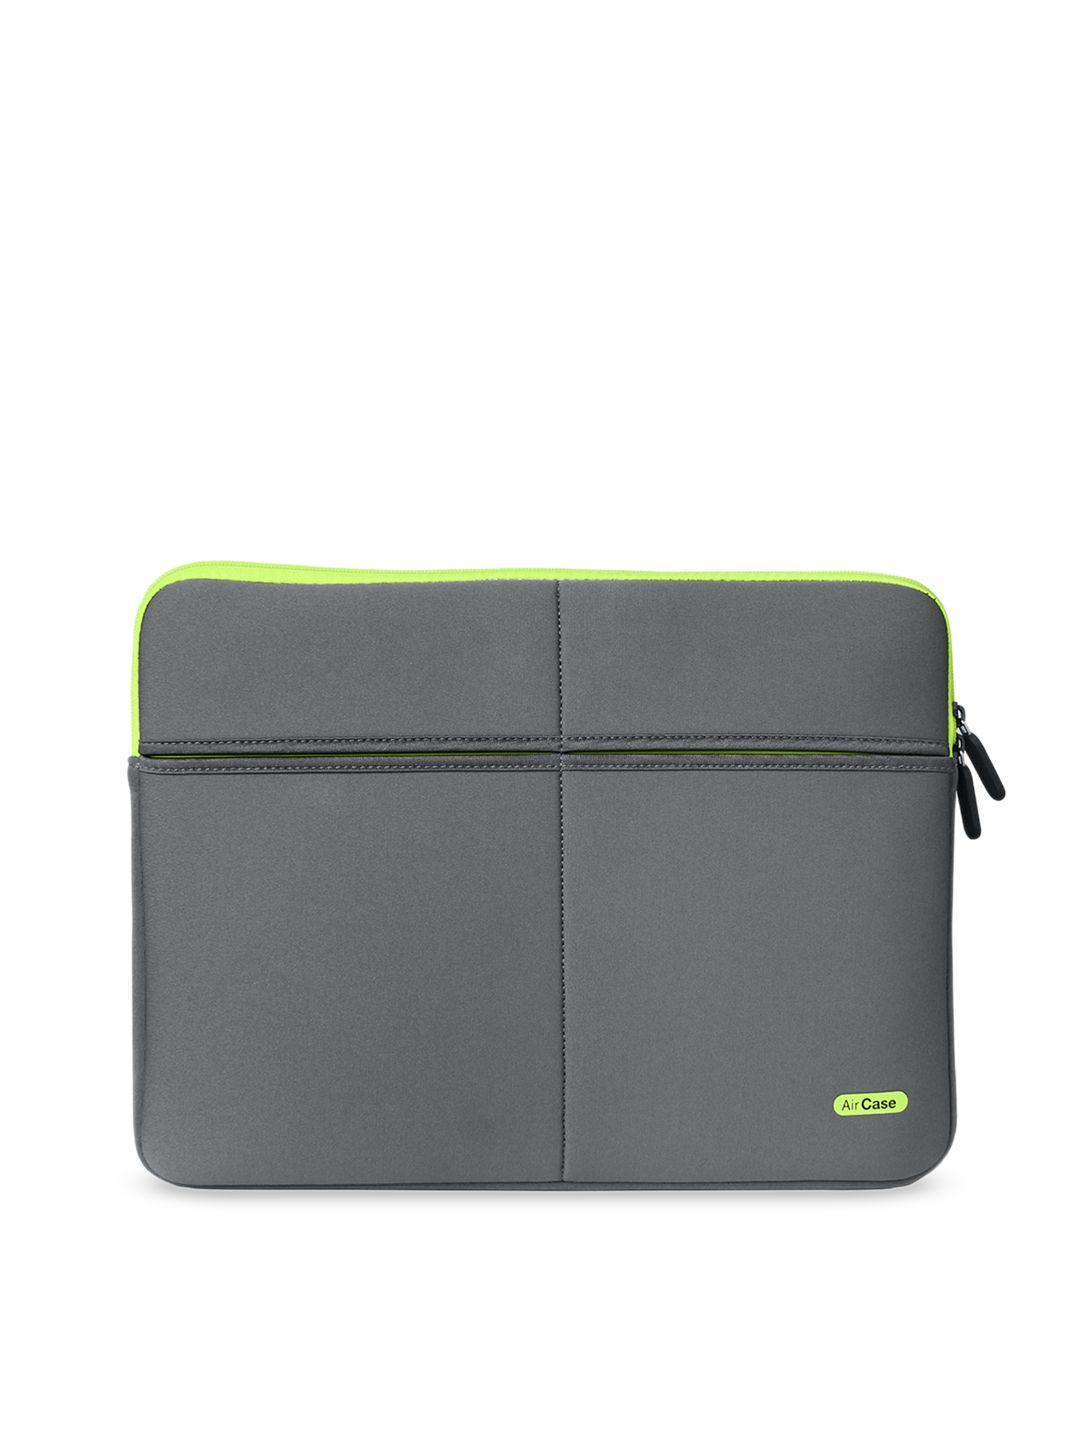 aircase unisex grey 14.1 inch solid laptop sleeve with 6 pockets